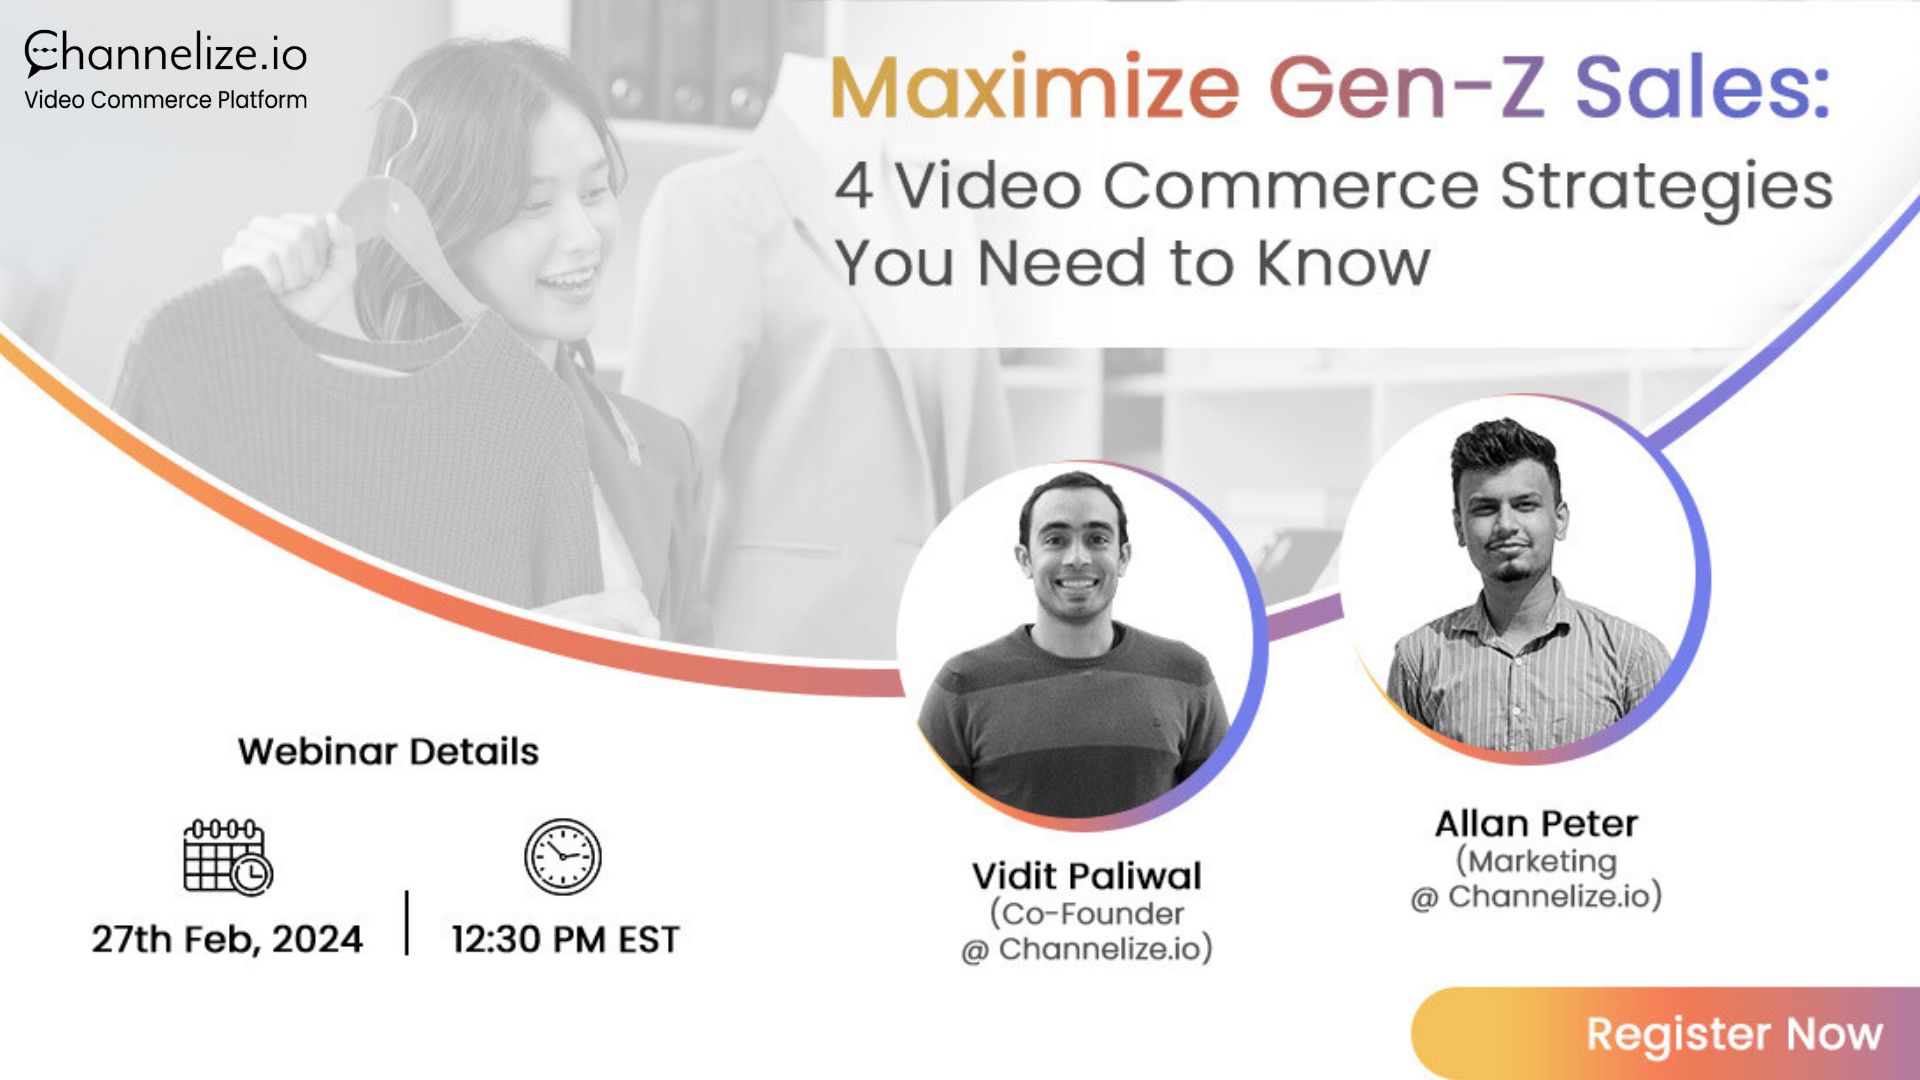 Dive into the power of Gen-Z sales with our upcoming webinar: Maximize Gen-Z Sales: 4 Video Commerce Strategies You Need to Know